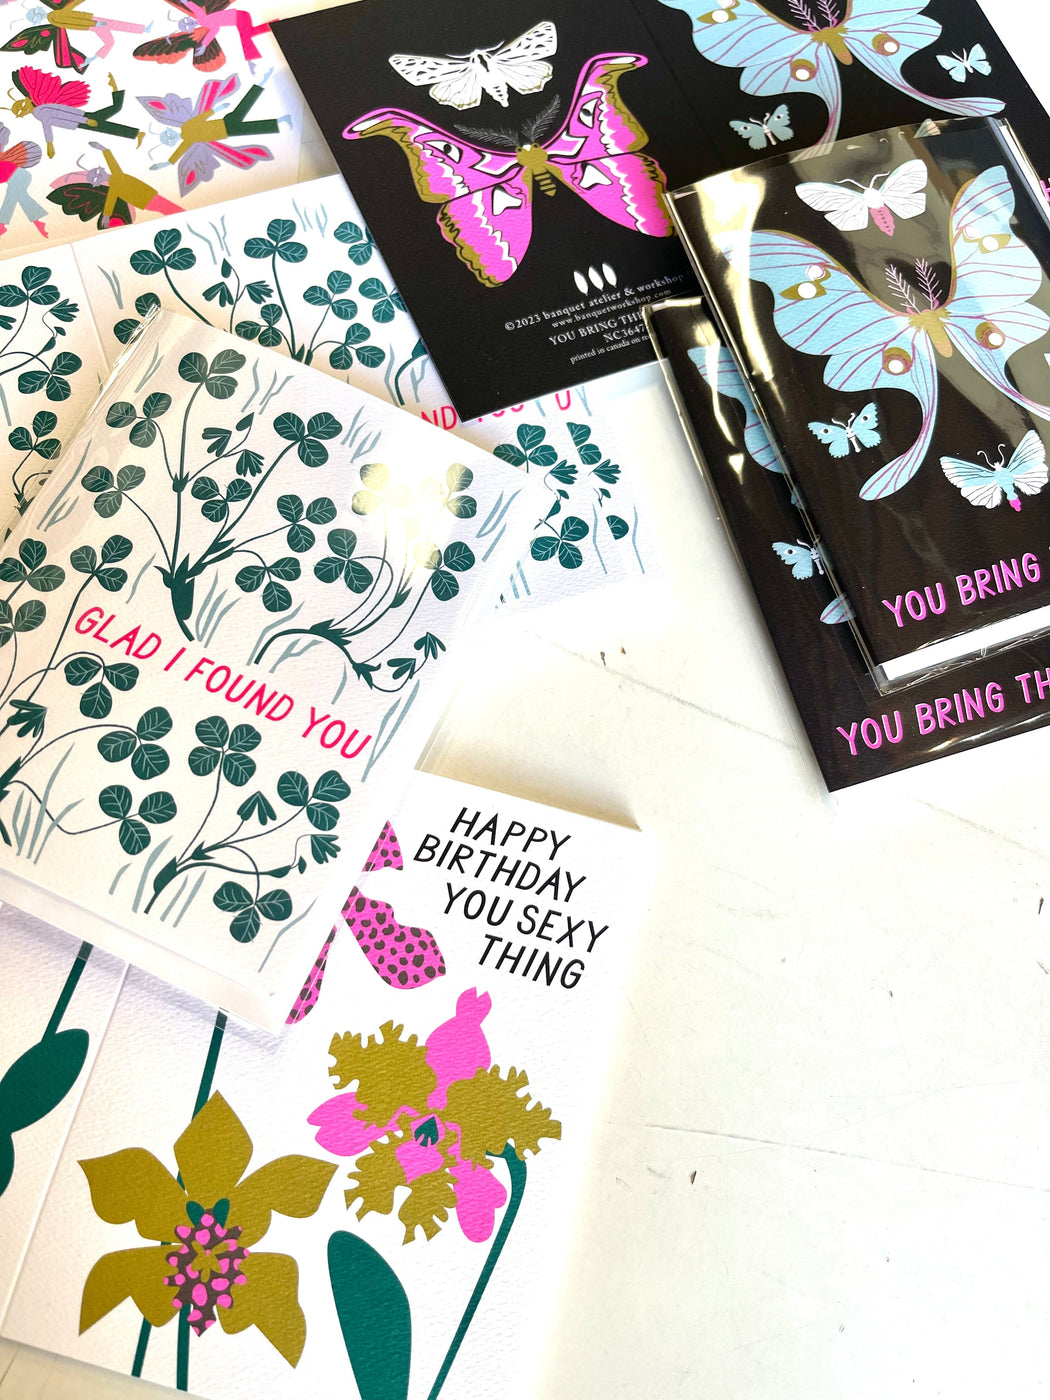 a scattering of note card with hand drawn orchids in neon purple golden green and text in black that say Happy Birthday You Sexy Thing and Glad I Found You clover card and You Bring the Light moth cards